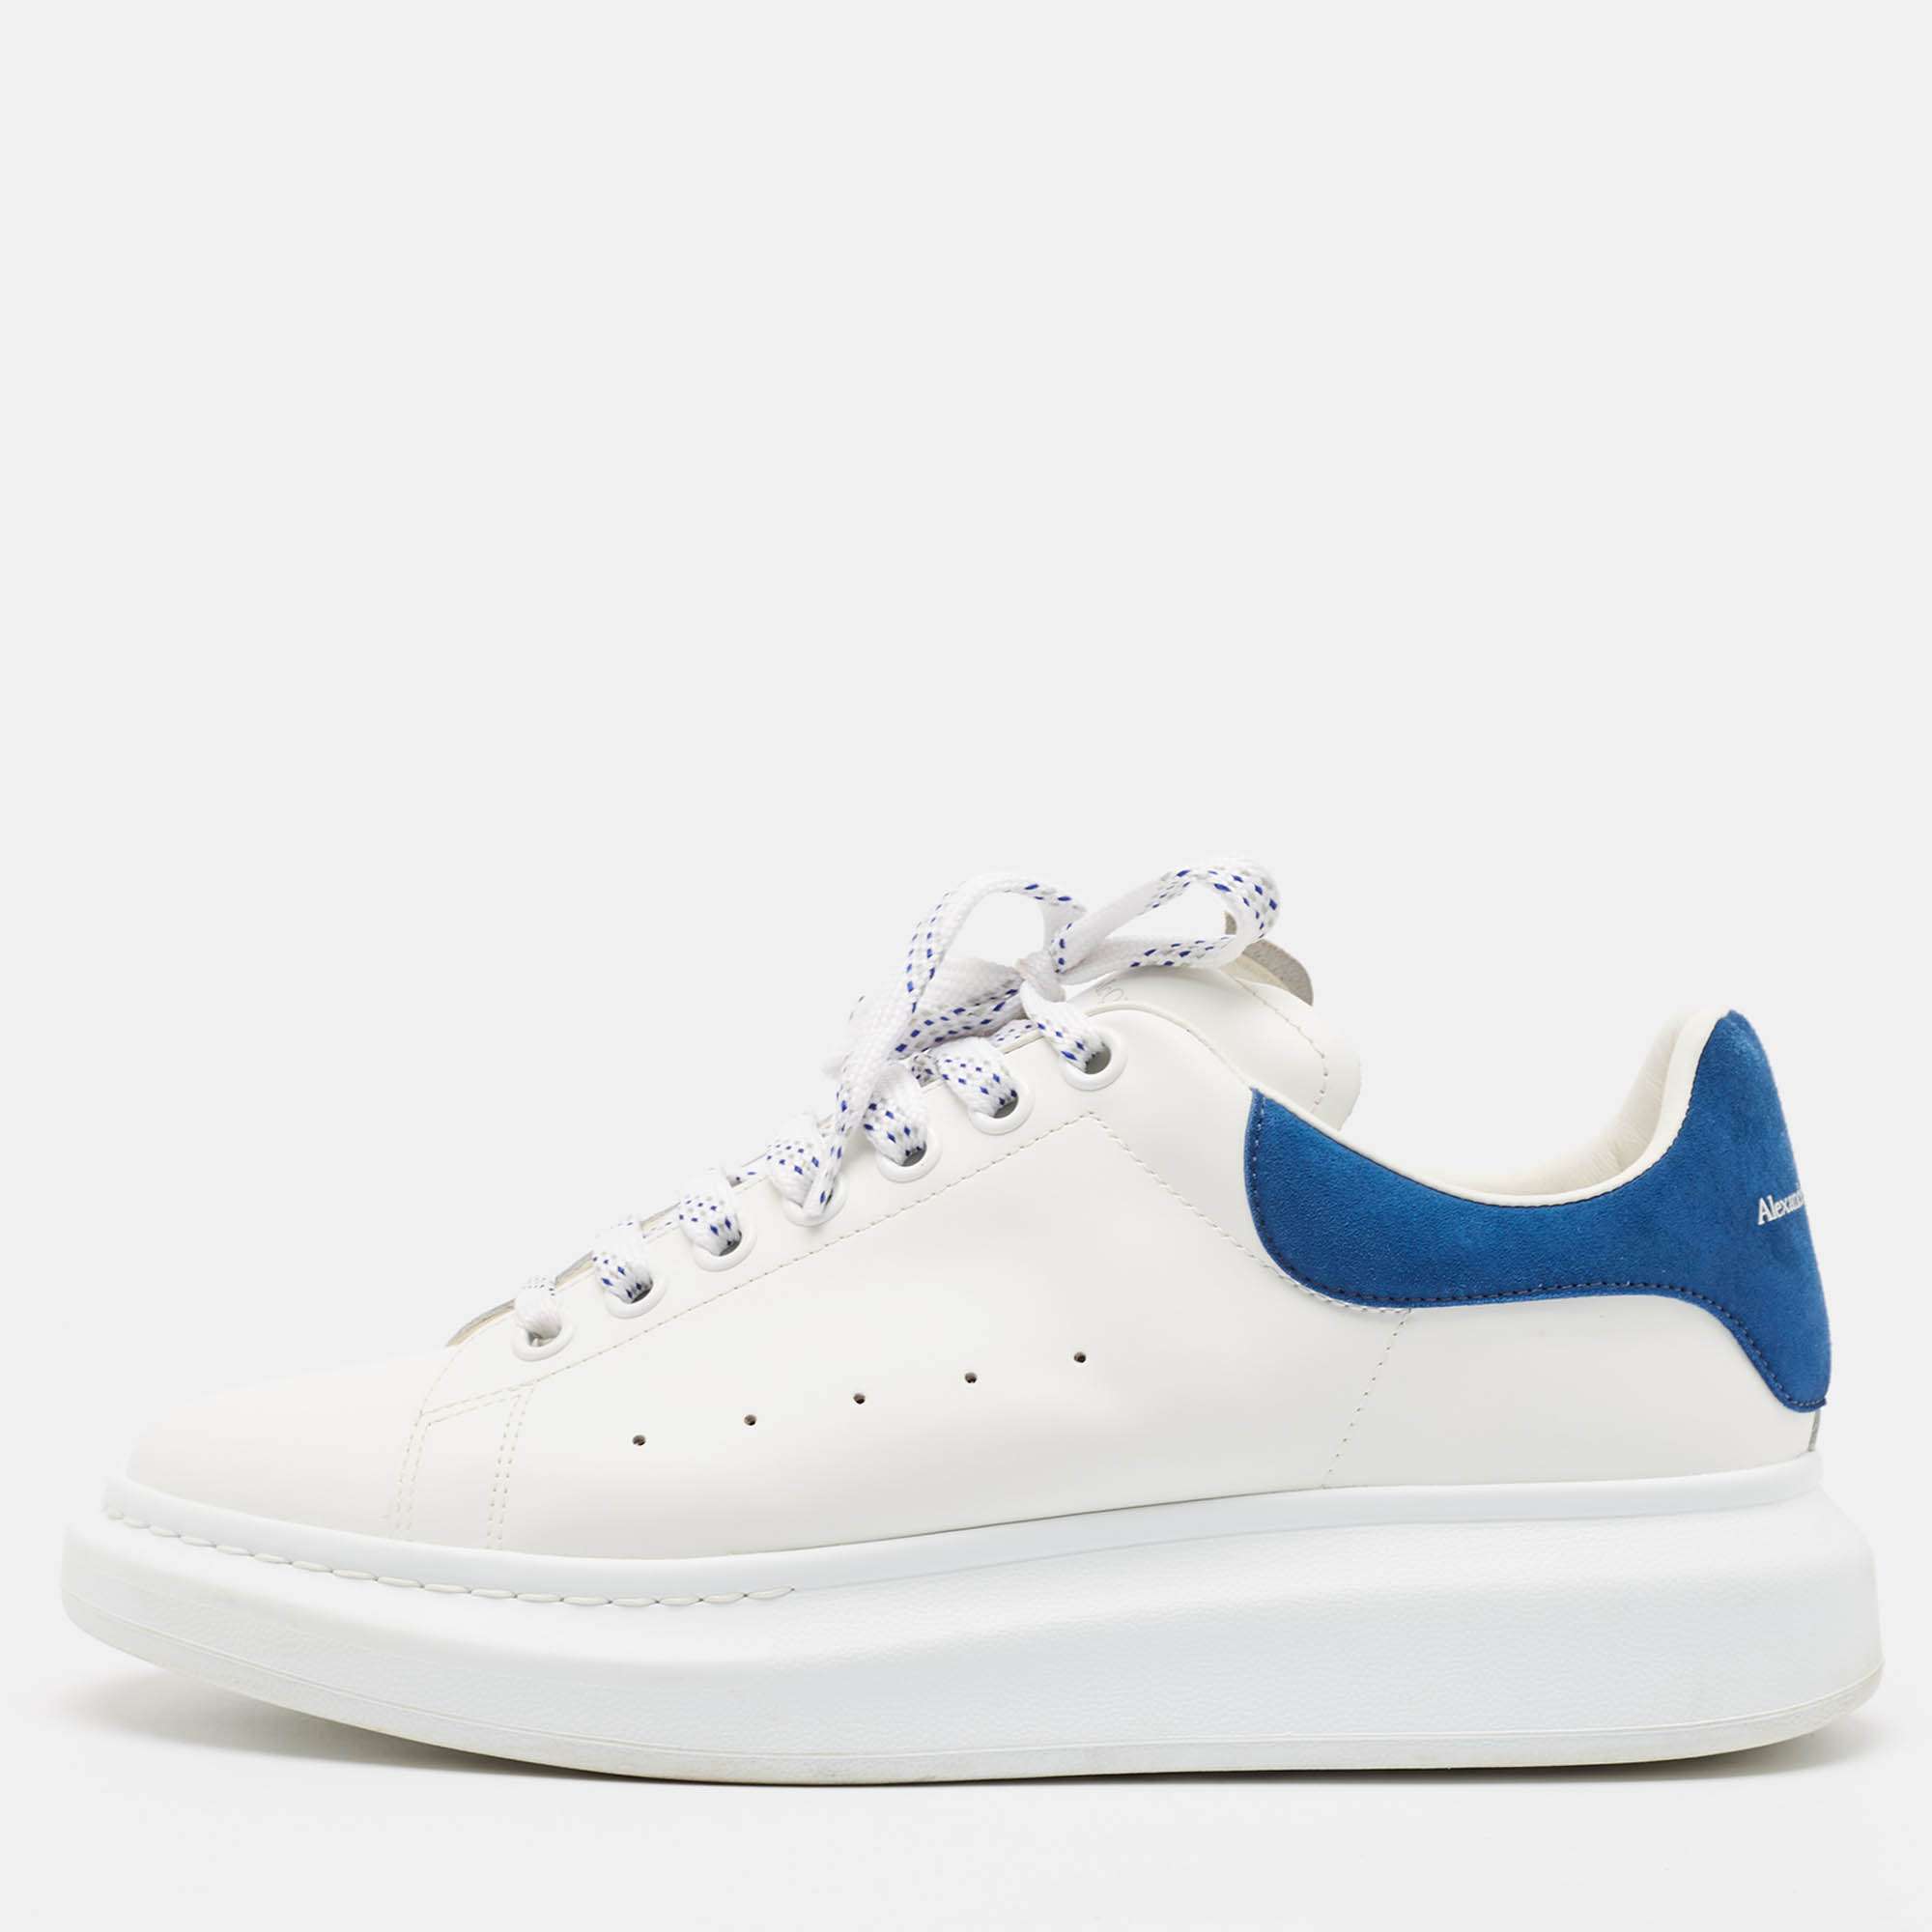 

Alexander McQueen White/Blue Leather and Suede Oversized Sneakers Size